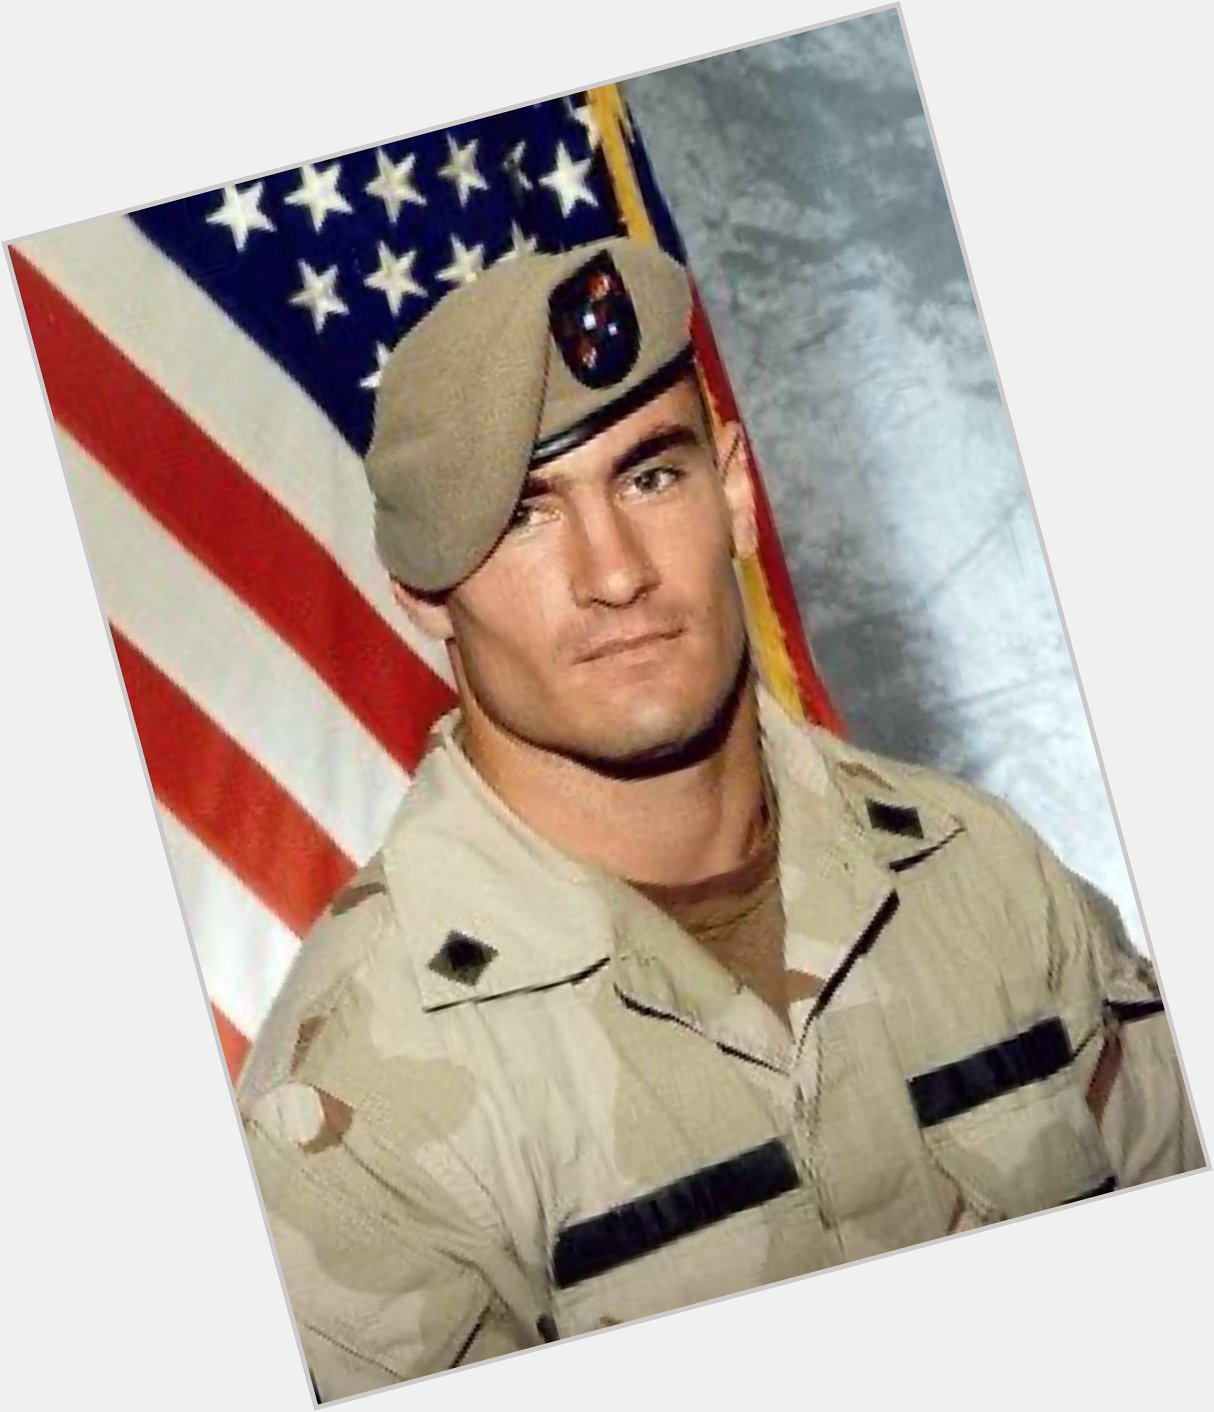 Happy birthday to Pat Tillman - a name every American should know and cherish. 